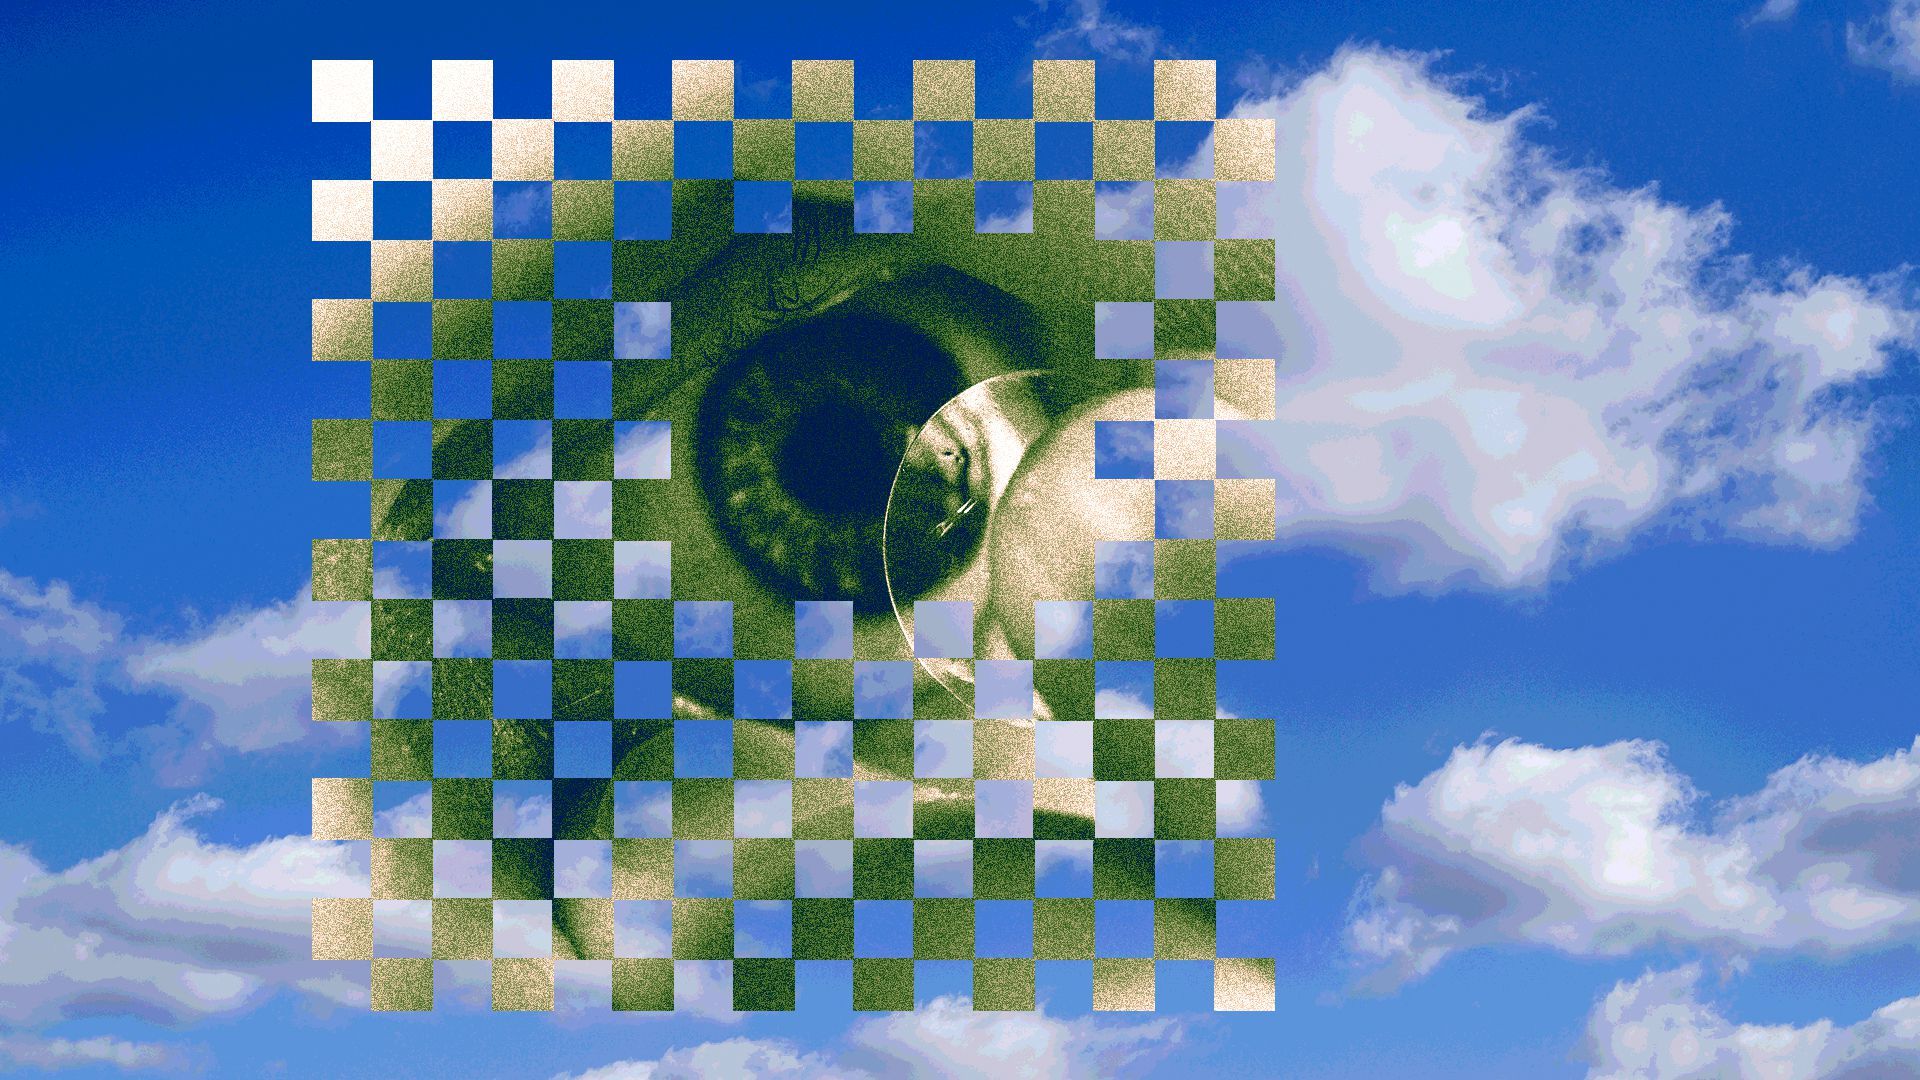 Illustration of a close up of a fragmented photo of hand placing a contact lens into an eye, laid over an image of clouds in the sky